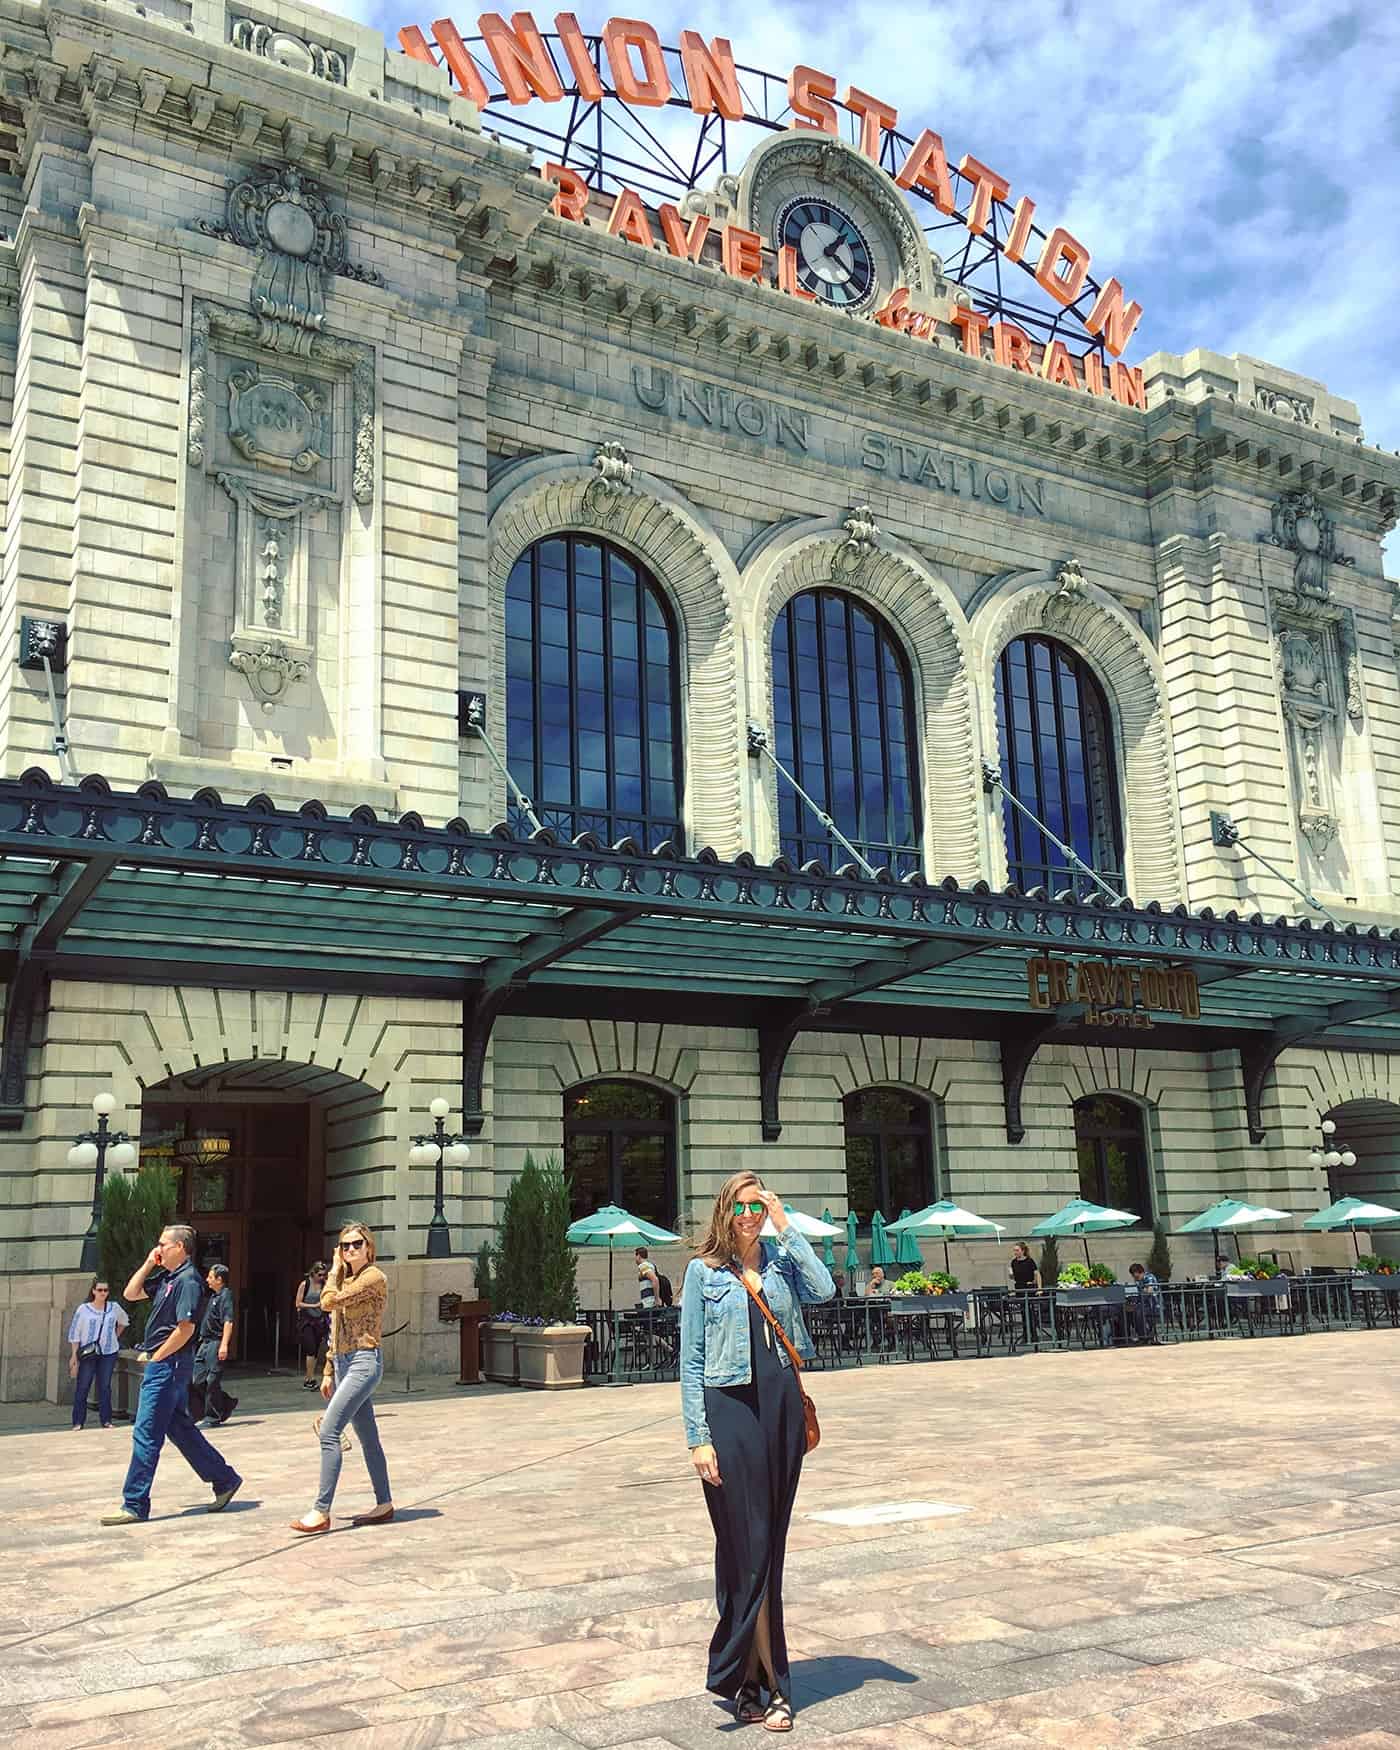 Union Station Denver - Top 10 Things To Do In Denver | Blue Mountain Belle